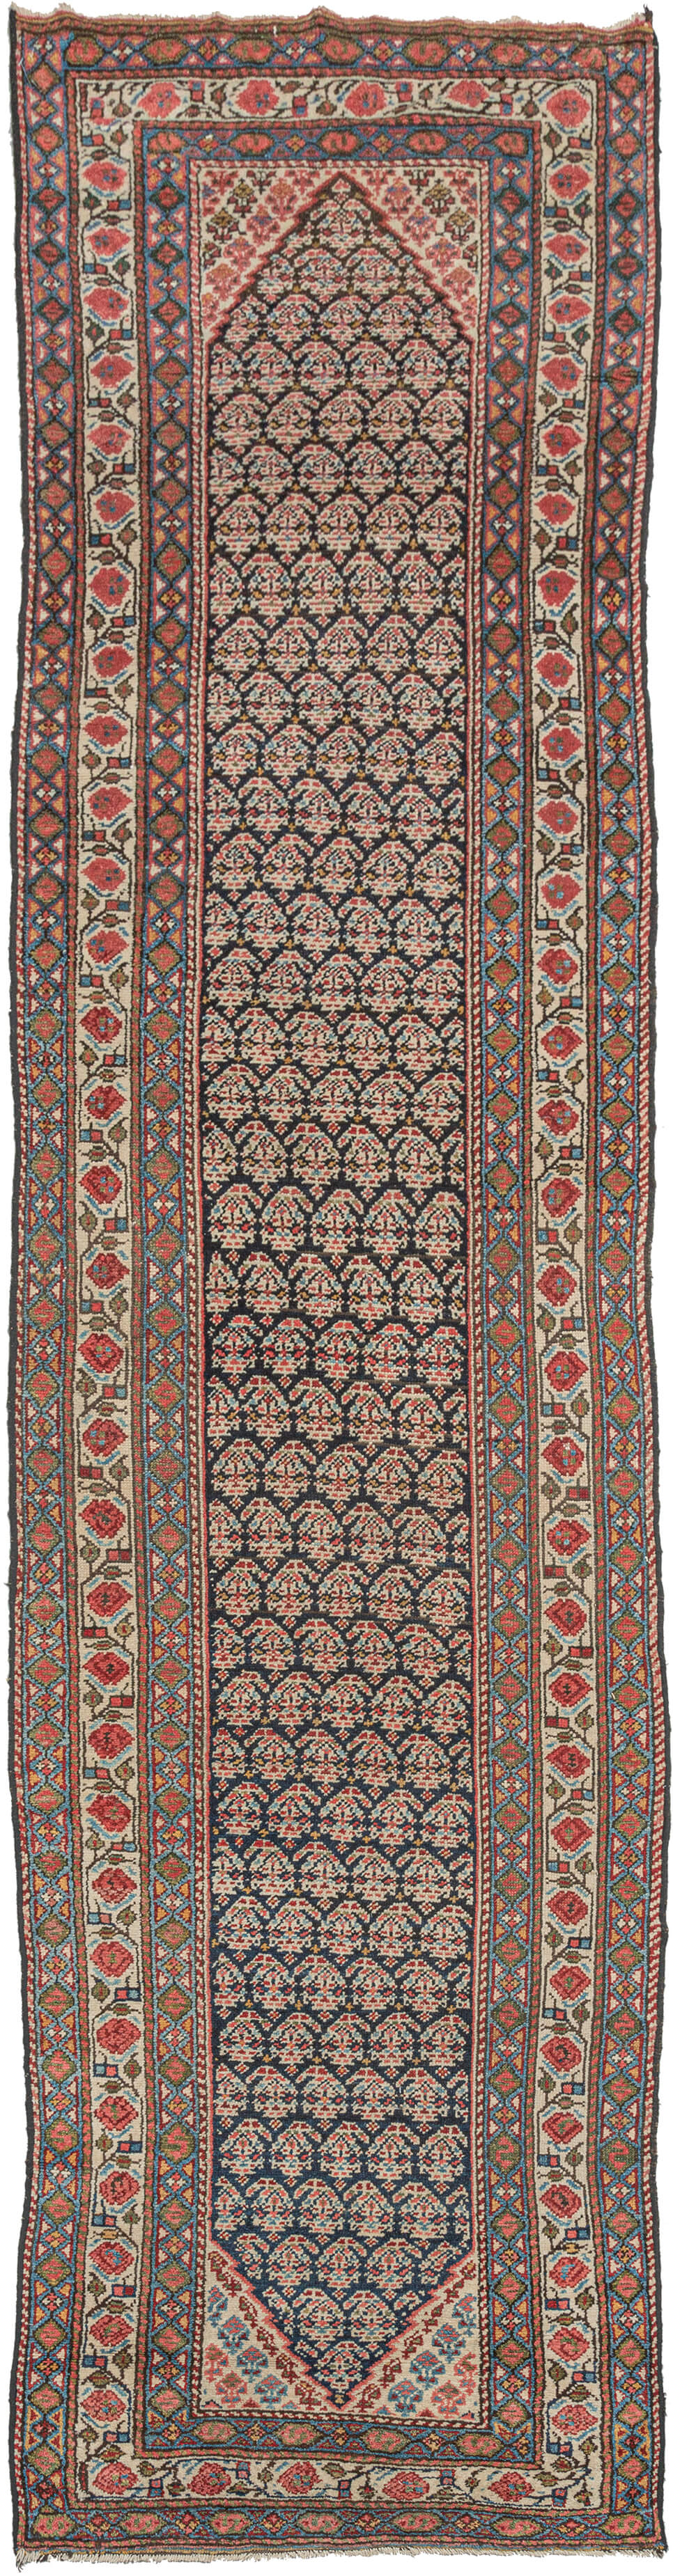 antique Persian Malayer runner featuring features rows of botehs marching to and fro on a navy field. It is framed by a well-spaced main border of roses blooming on a meandering vine against a bright ivory ground. The main border is flanked by matching minor borders that alternate between 